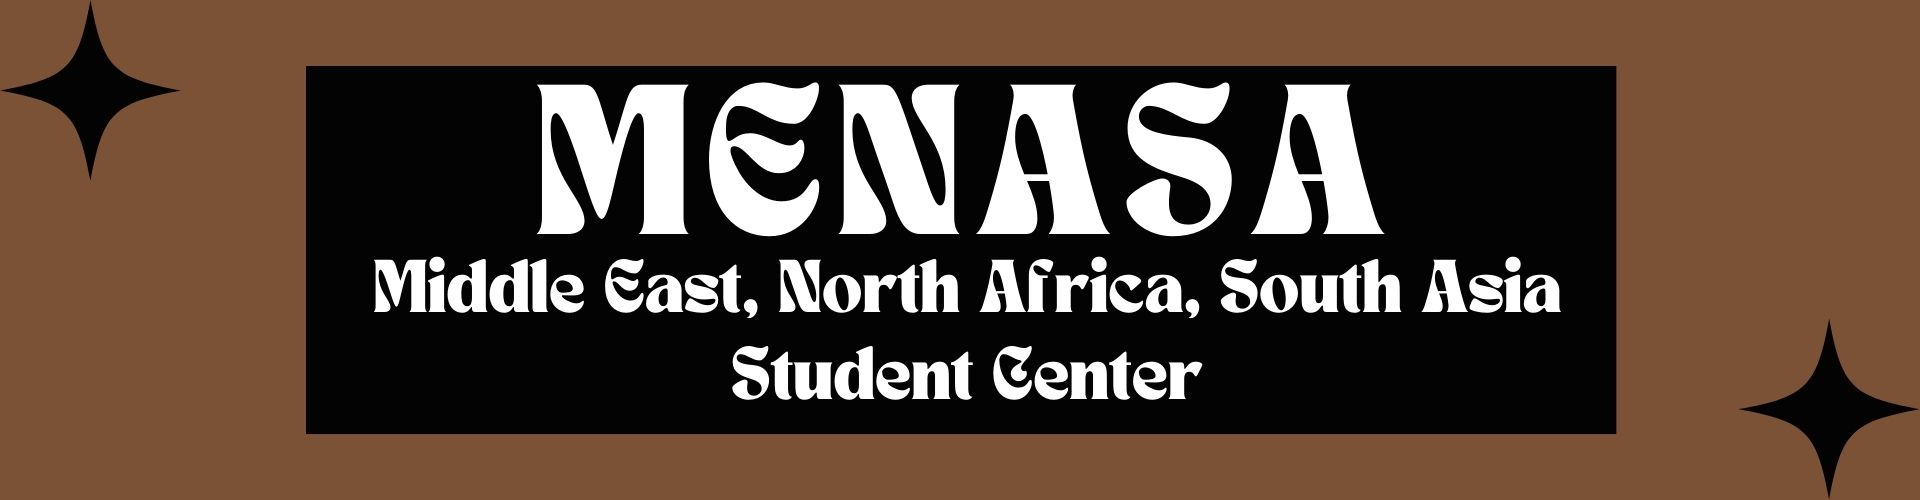 "MENASA Middle East, North Africa, South Asian Student Center" in white text against a black & brown background  with Black stars in the corners